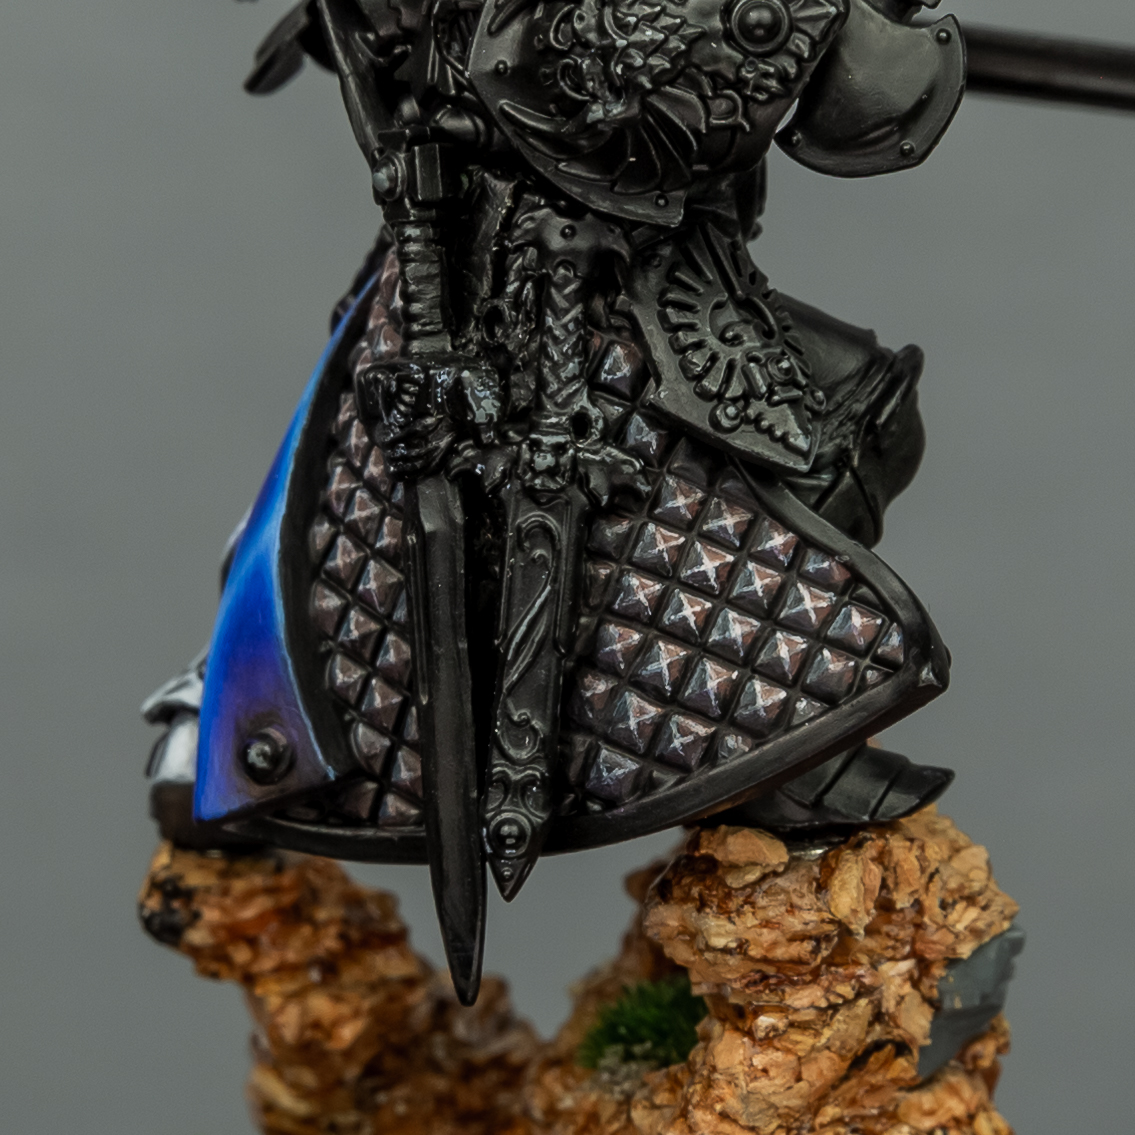 For the quilted coat I wanted to go for a dark and subtle scheme to complement the bright armor and blue fabric color.

#minipainting #WarhammerCommunity